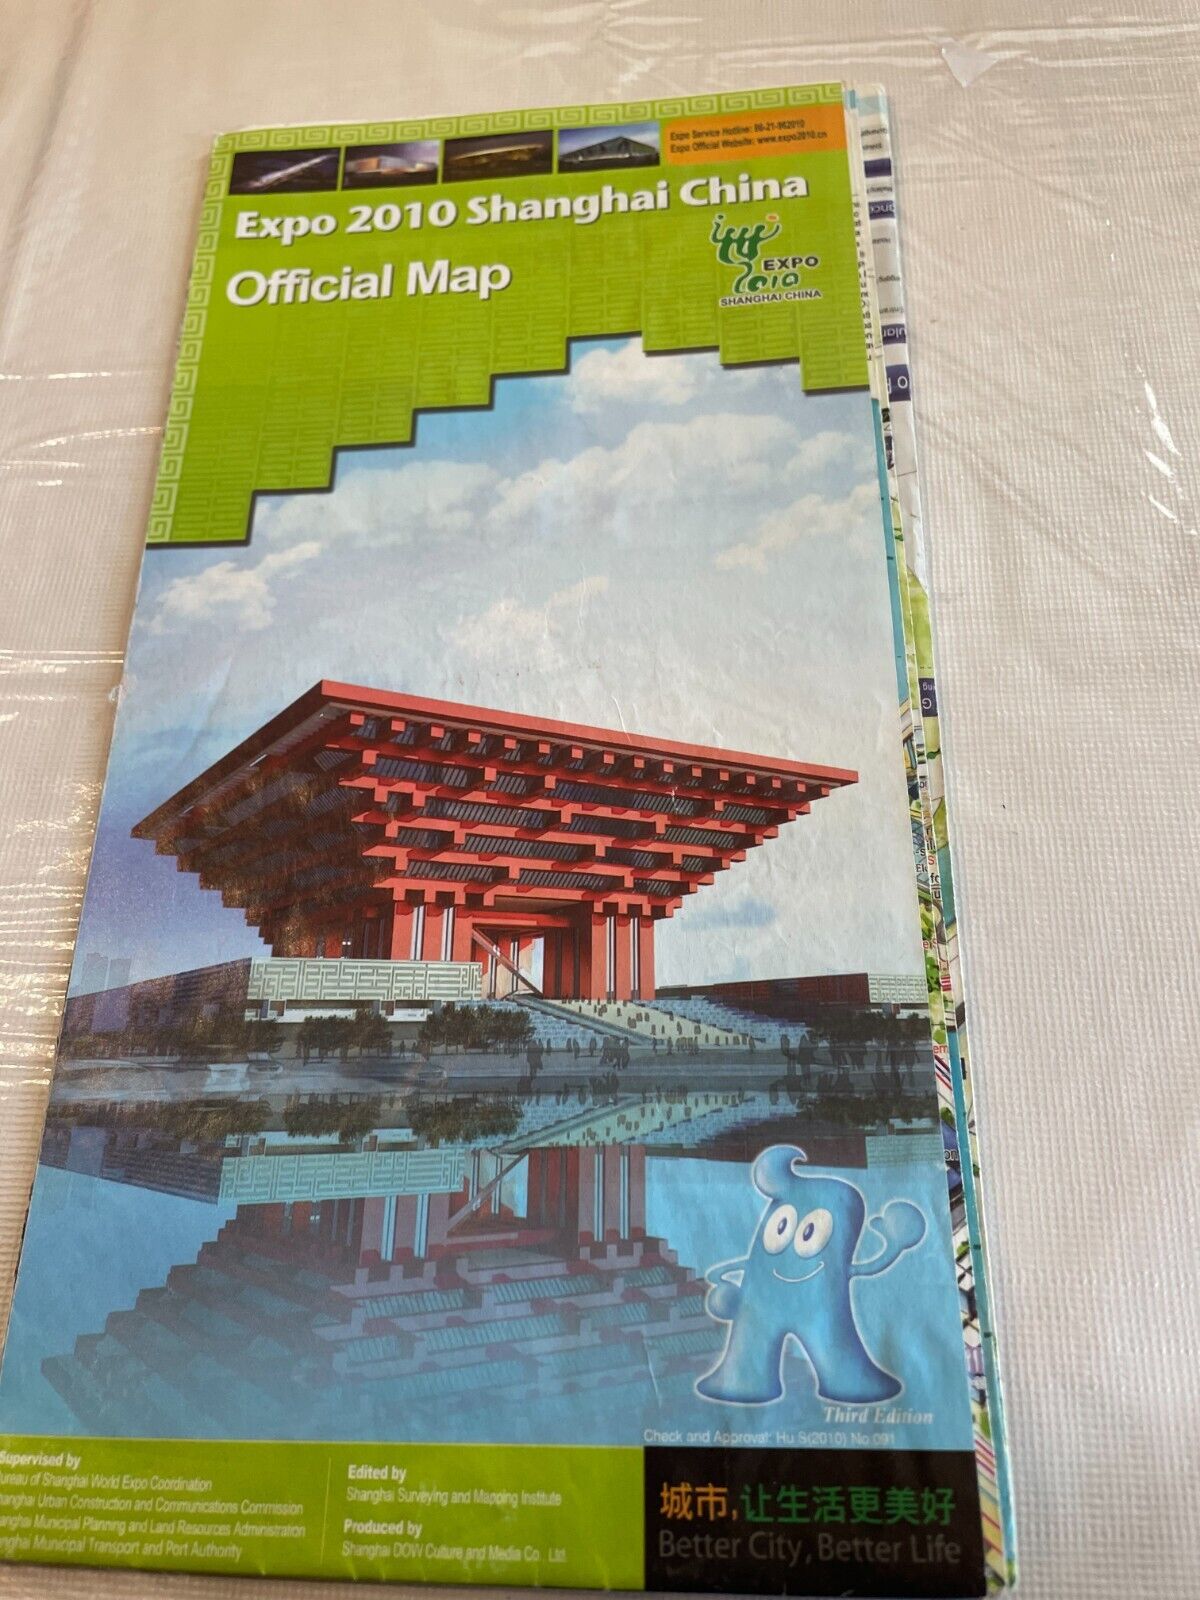 Expo 2010 Shanghai, China Official Map